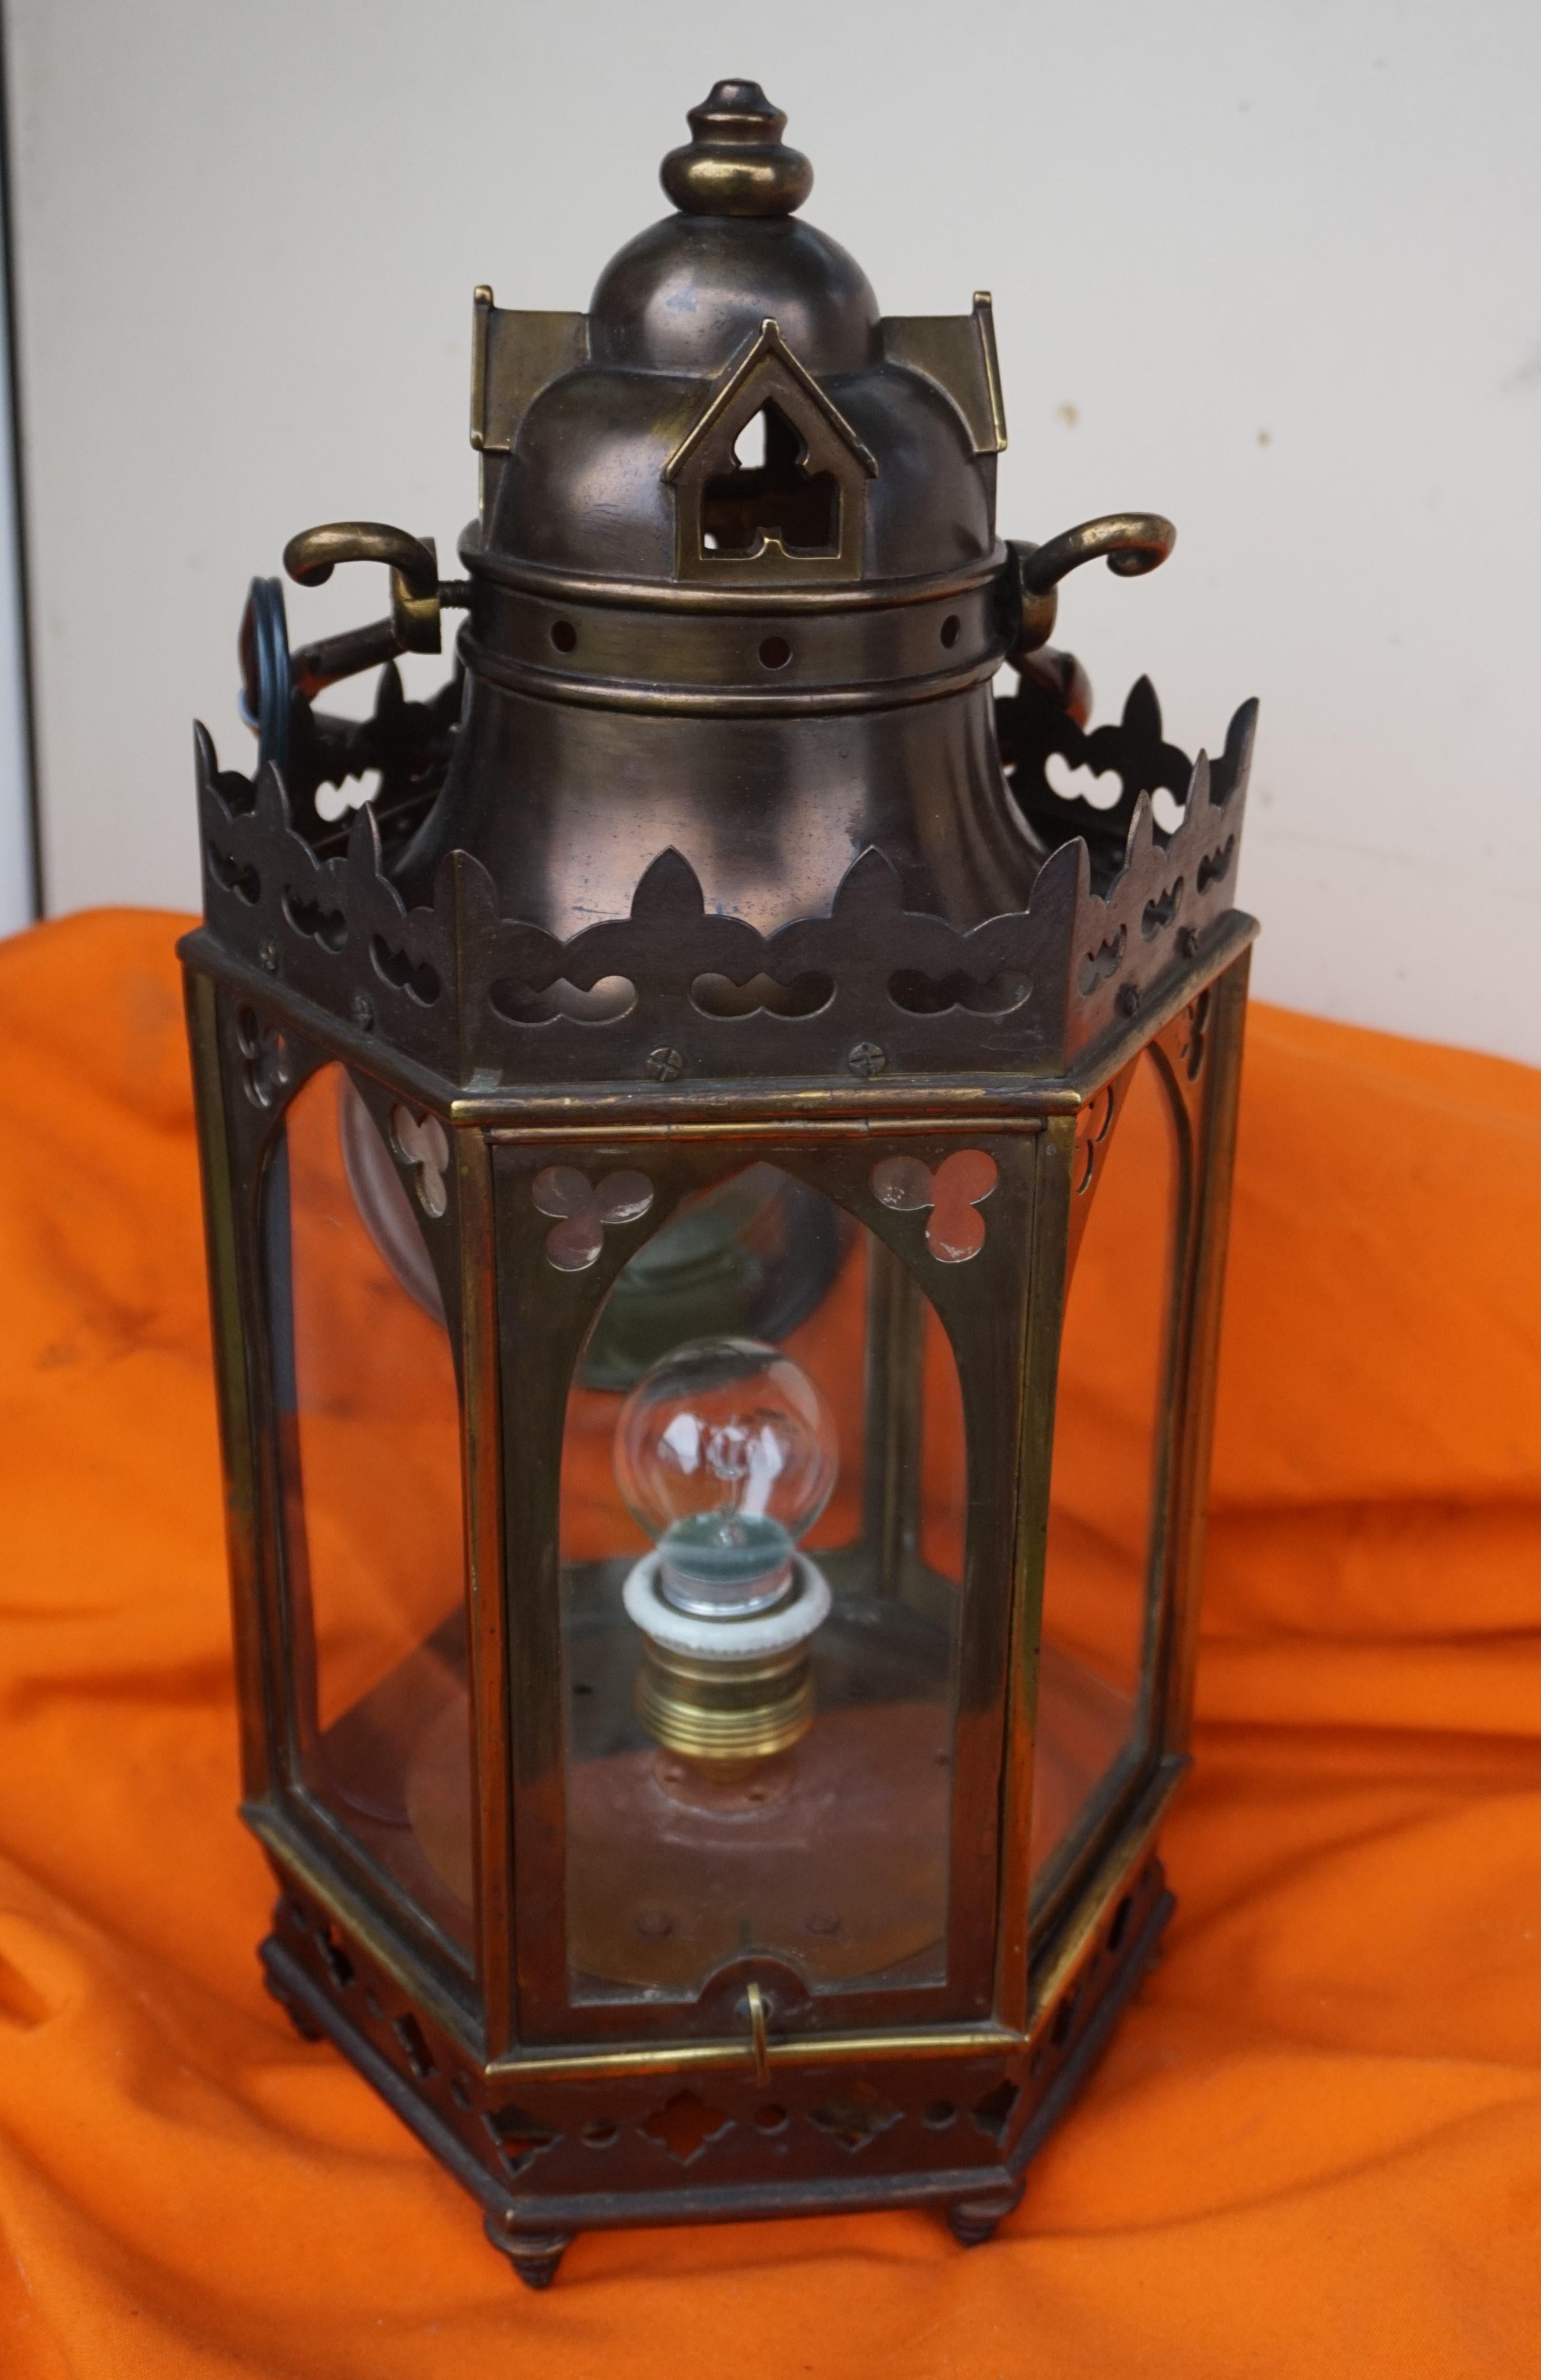 Rare and beautifully handcrafted church relic with a chapel dome top.

For the collectors of rare and interesting antiques in the Gothic style we also have this remarkable, hexagonal church lantern. We believe that it was initially made for a church